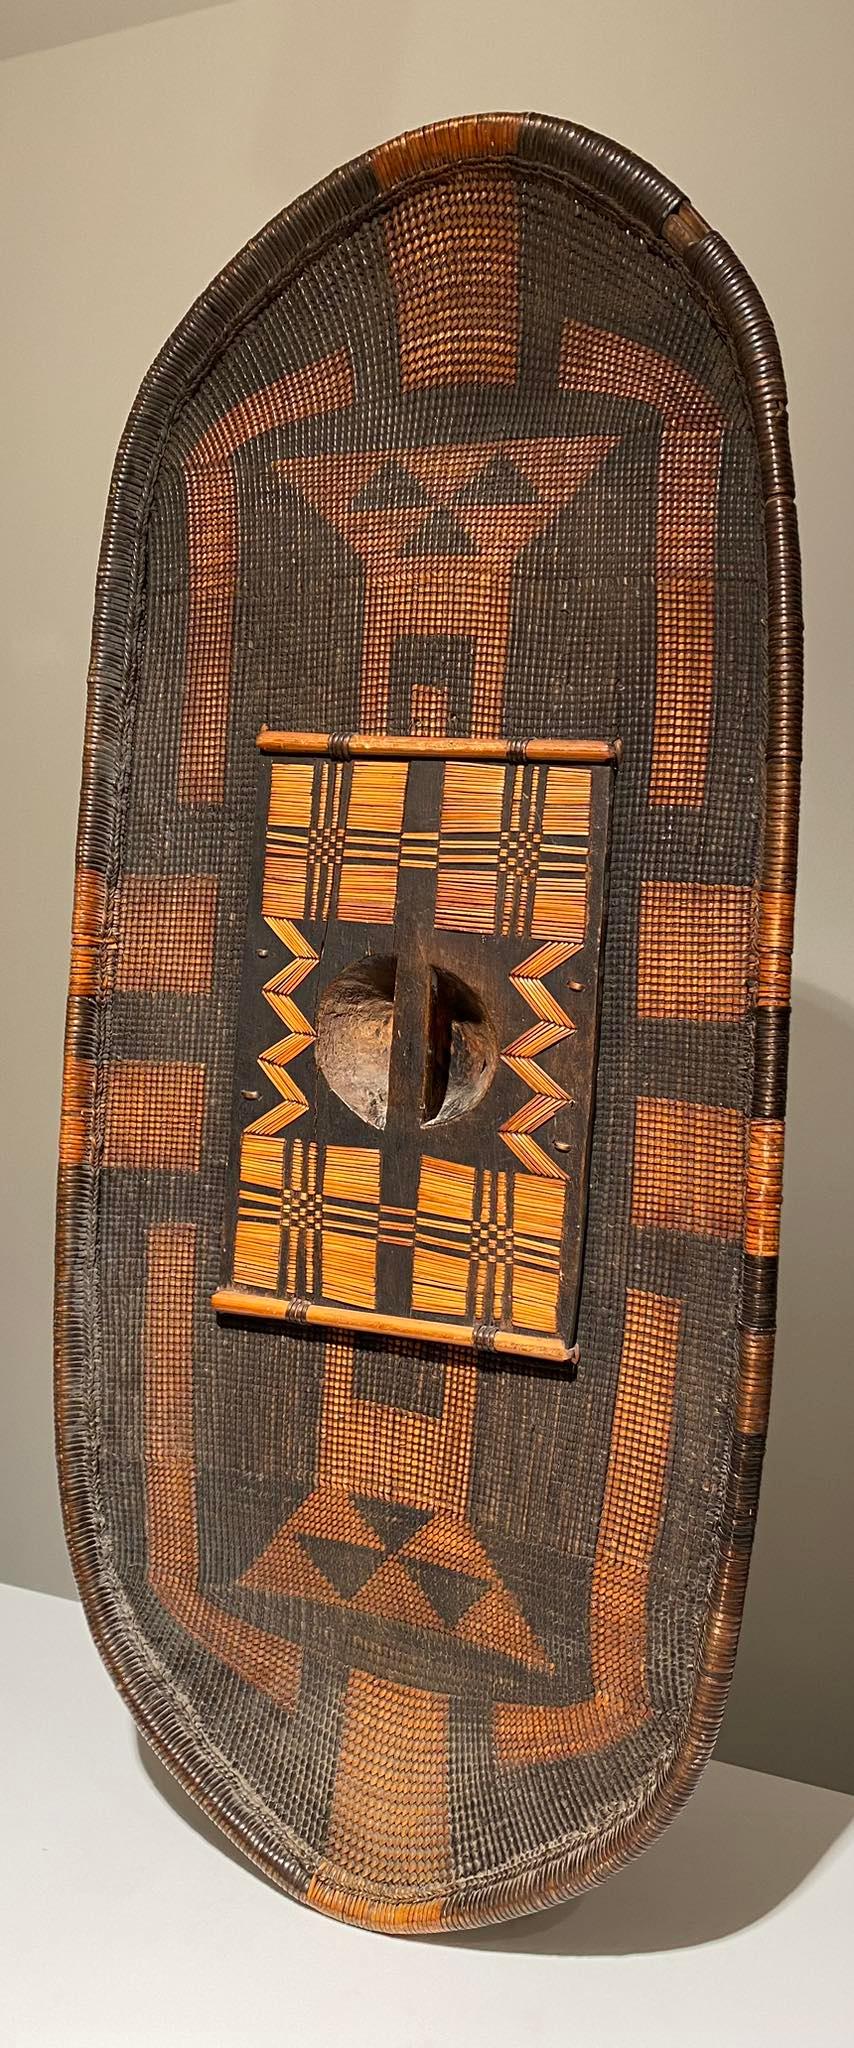 Exceptional Gbilija Shield from the Zande tribe- DR CONGO
Museum Quality
Very rare piece in perfect condition.
Exceptional piece and museum quality (see photos please)
Period: 19th Century
Length: 113 cm x 52 cm
In very good to excellent condition